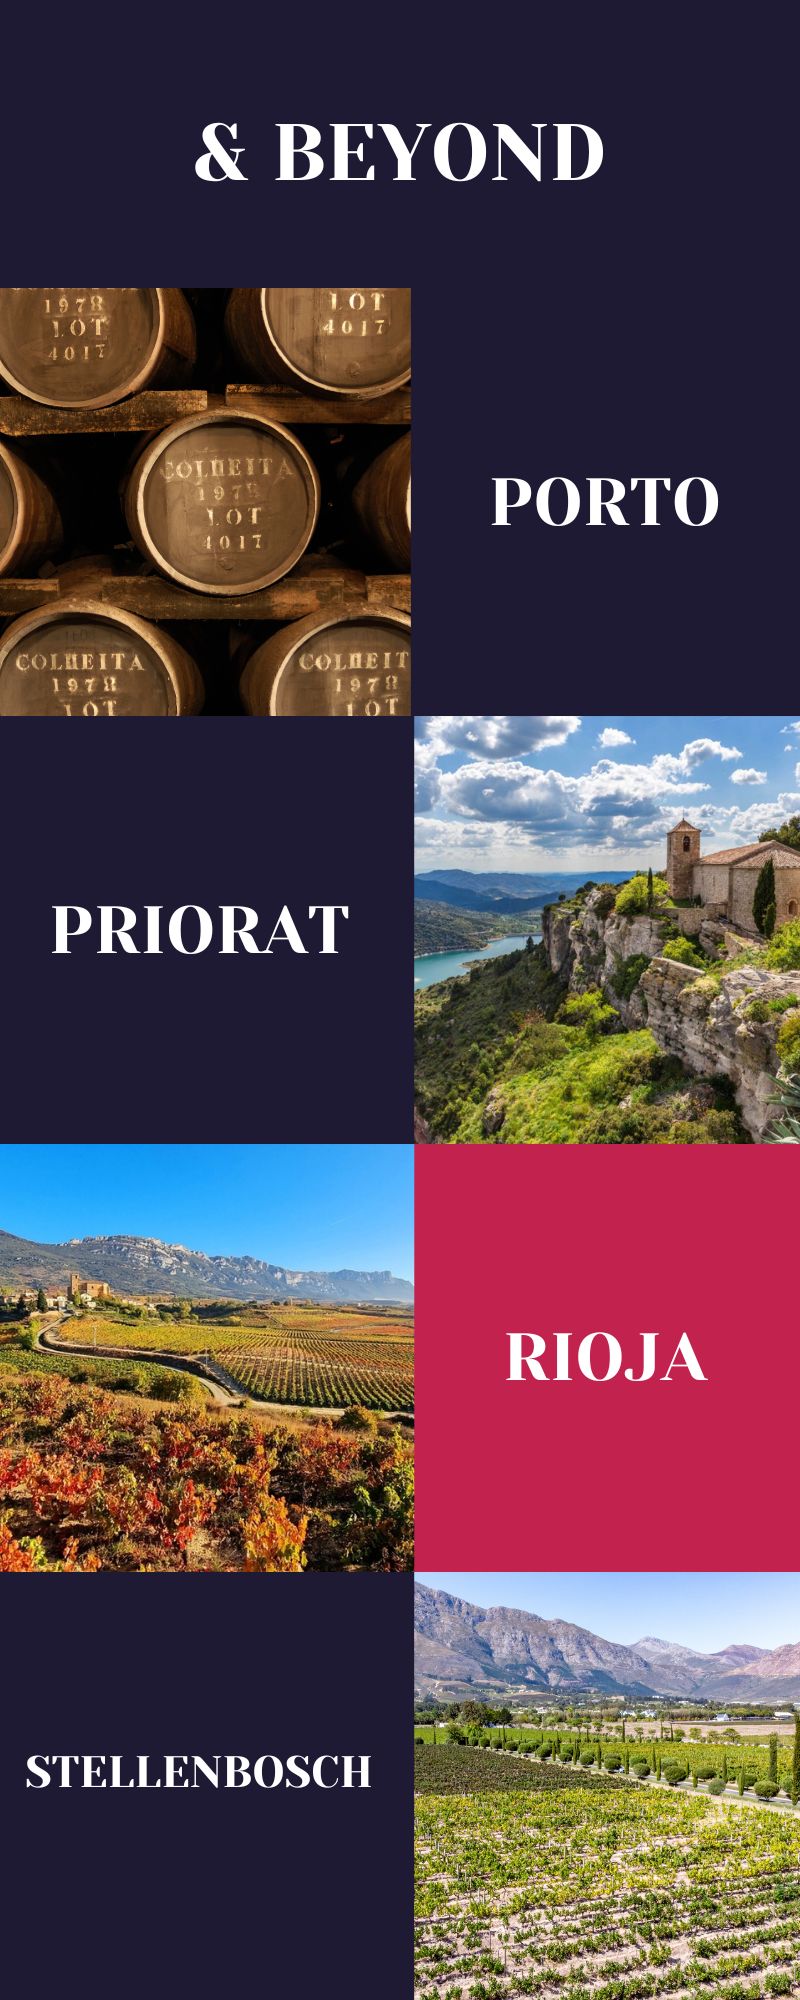 wine tourism in europe